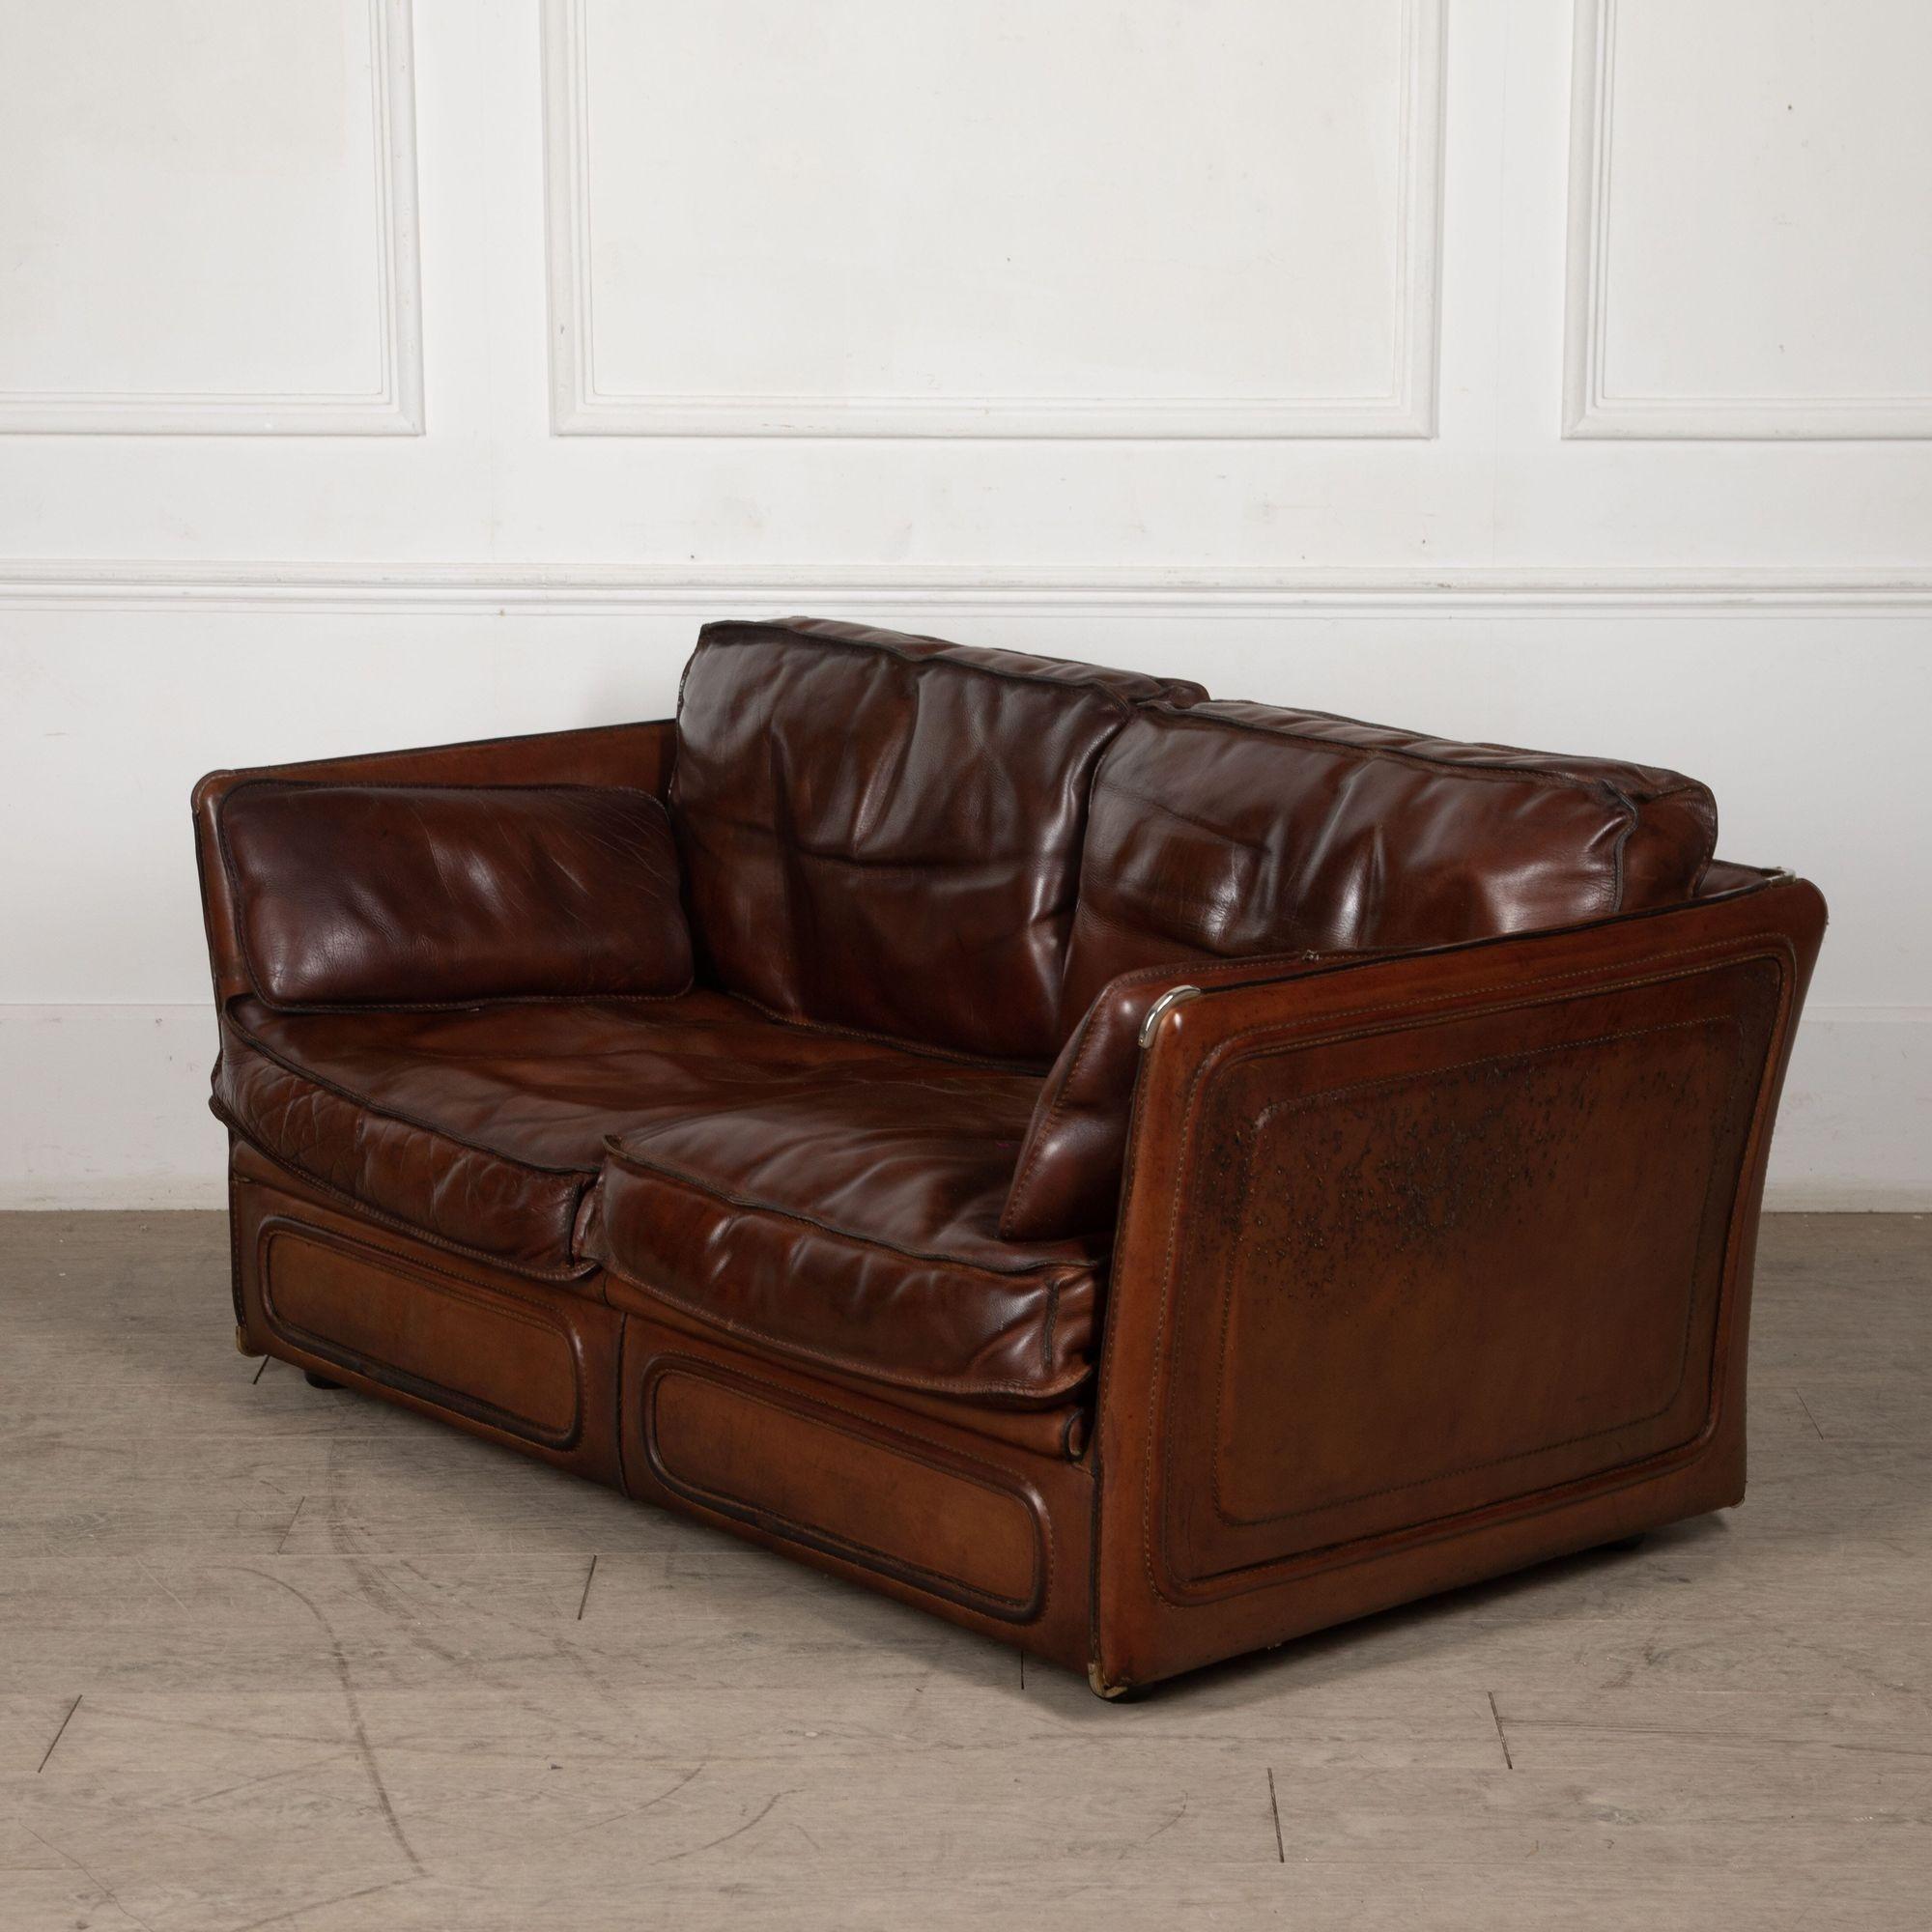 Mid-Century Modern Roche Bobois Saddle Leather Sofa After Hermes For Sale